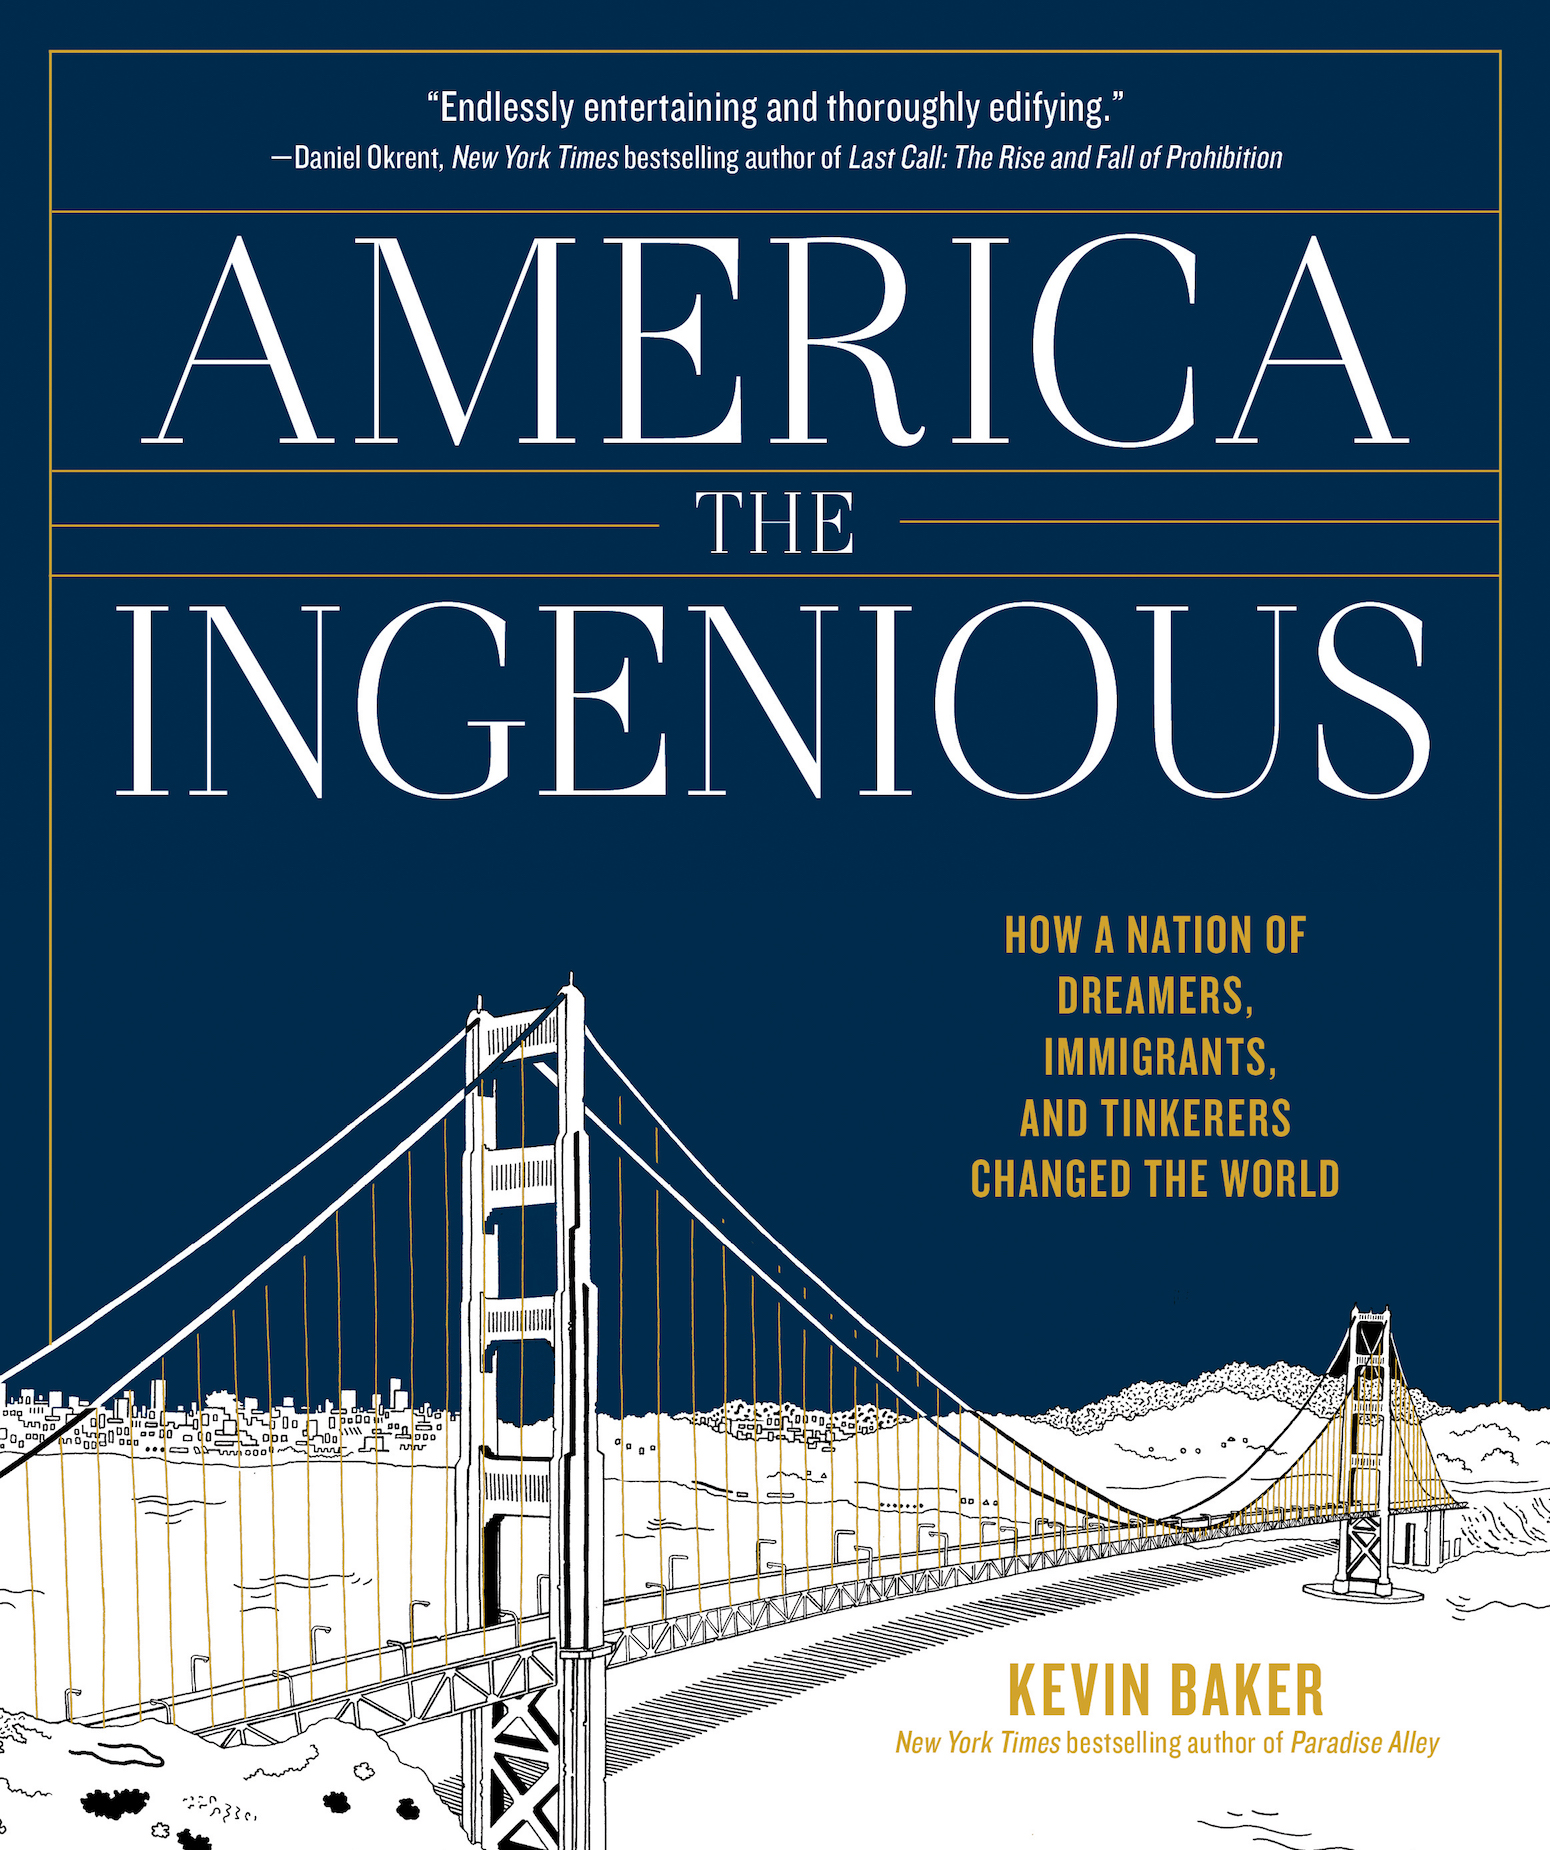 Book Launch: America the Ingenious: How a Nation of Dreamers, Immigrants, and Tinkerers Changed the World by Kevin Baker